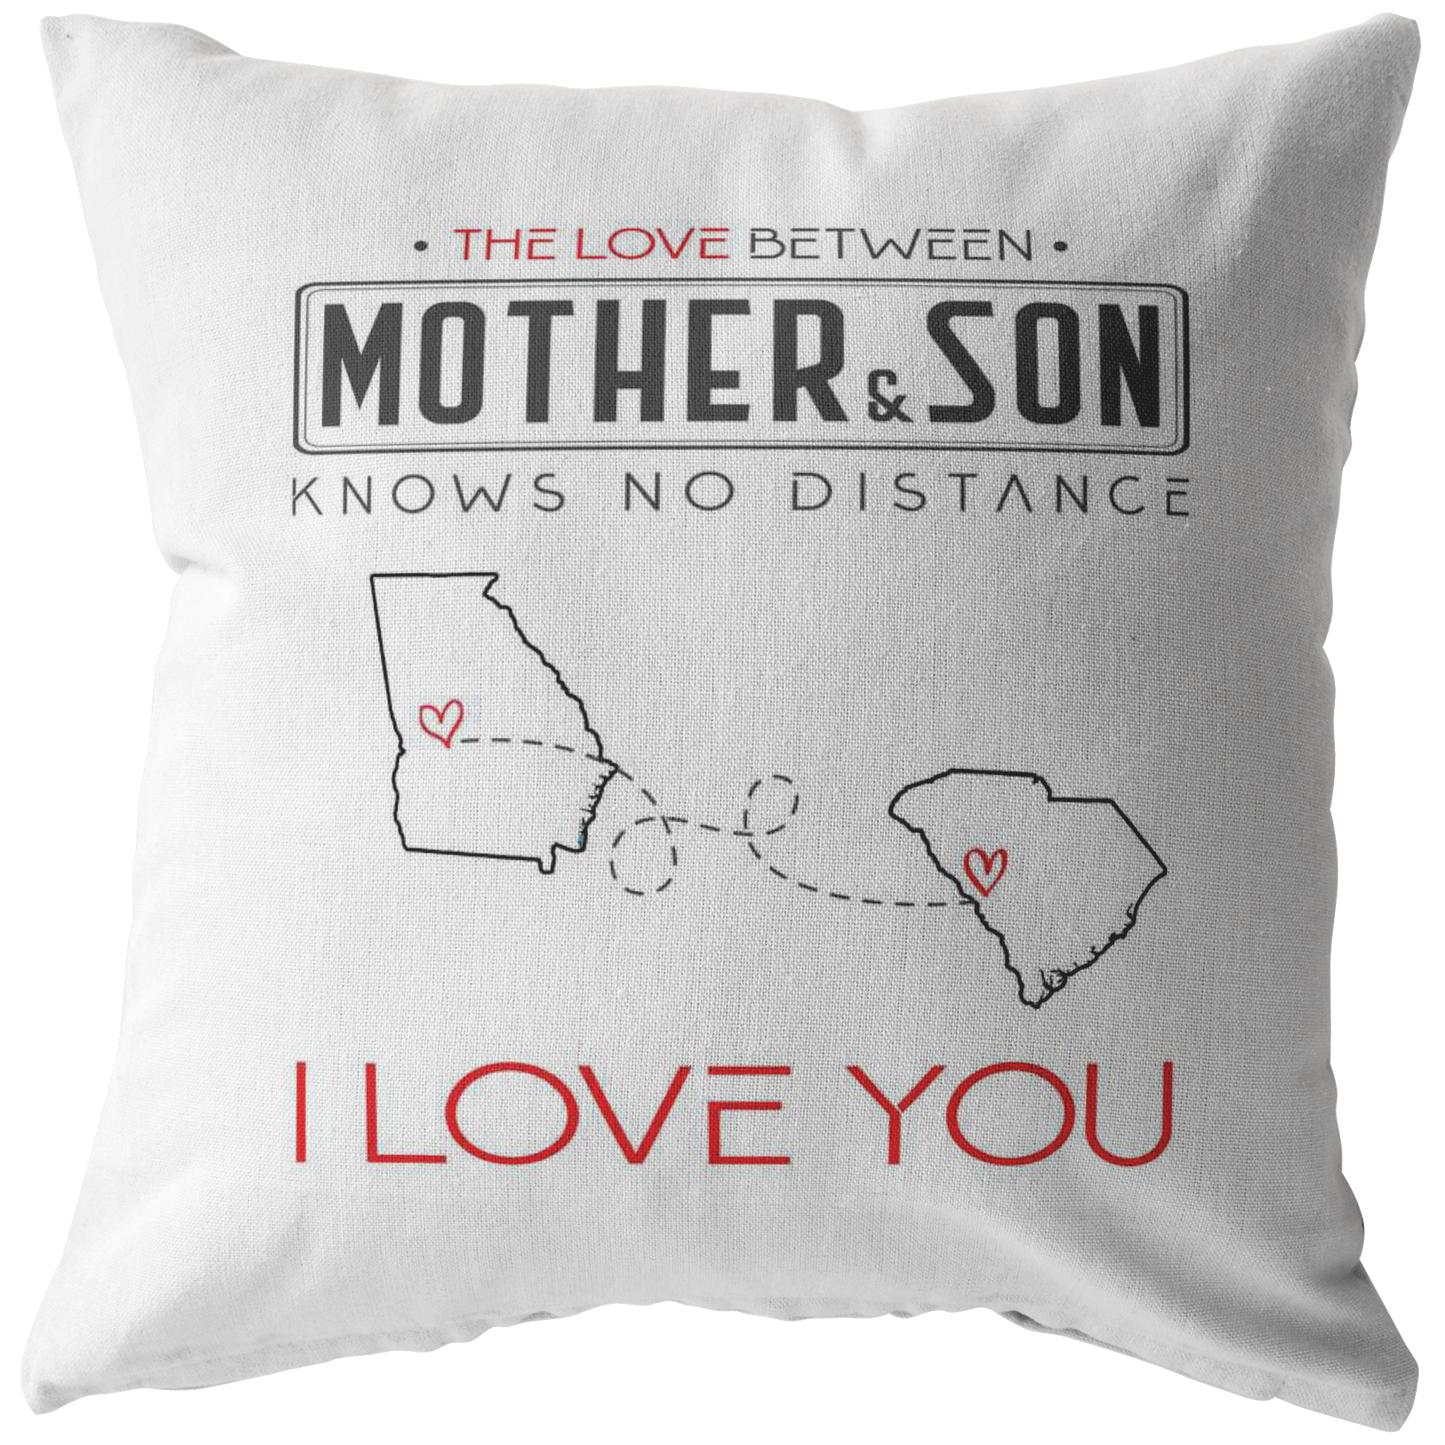 ND-pl20419438-sp-26821 - [ Georgia | South Carolina | Mother And Son ] (PI_ThrowPillowCovers) Happy Farhers Day, Mothers Day Decoration Personalized - The